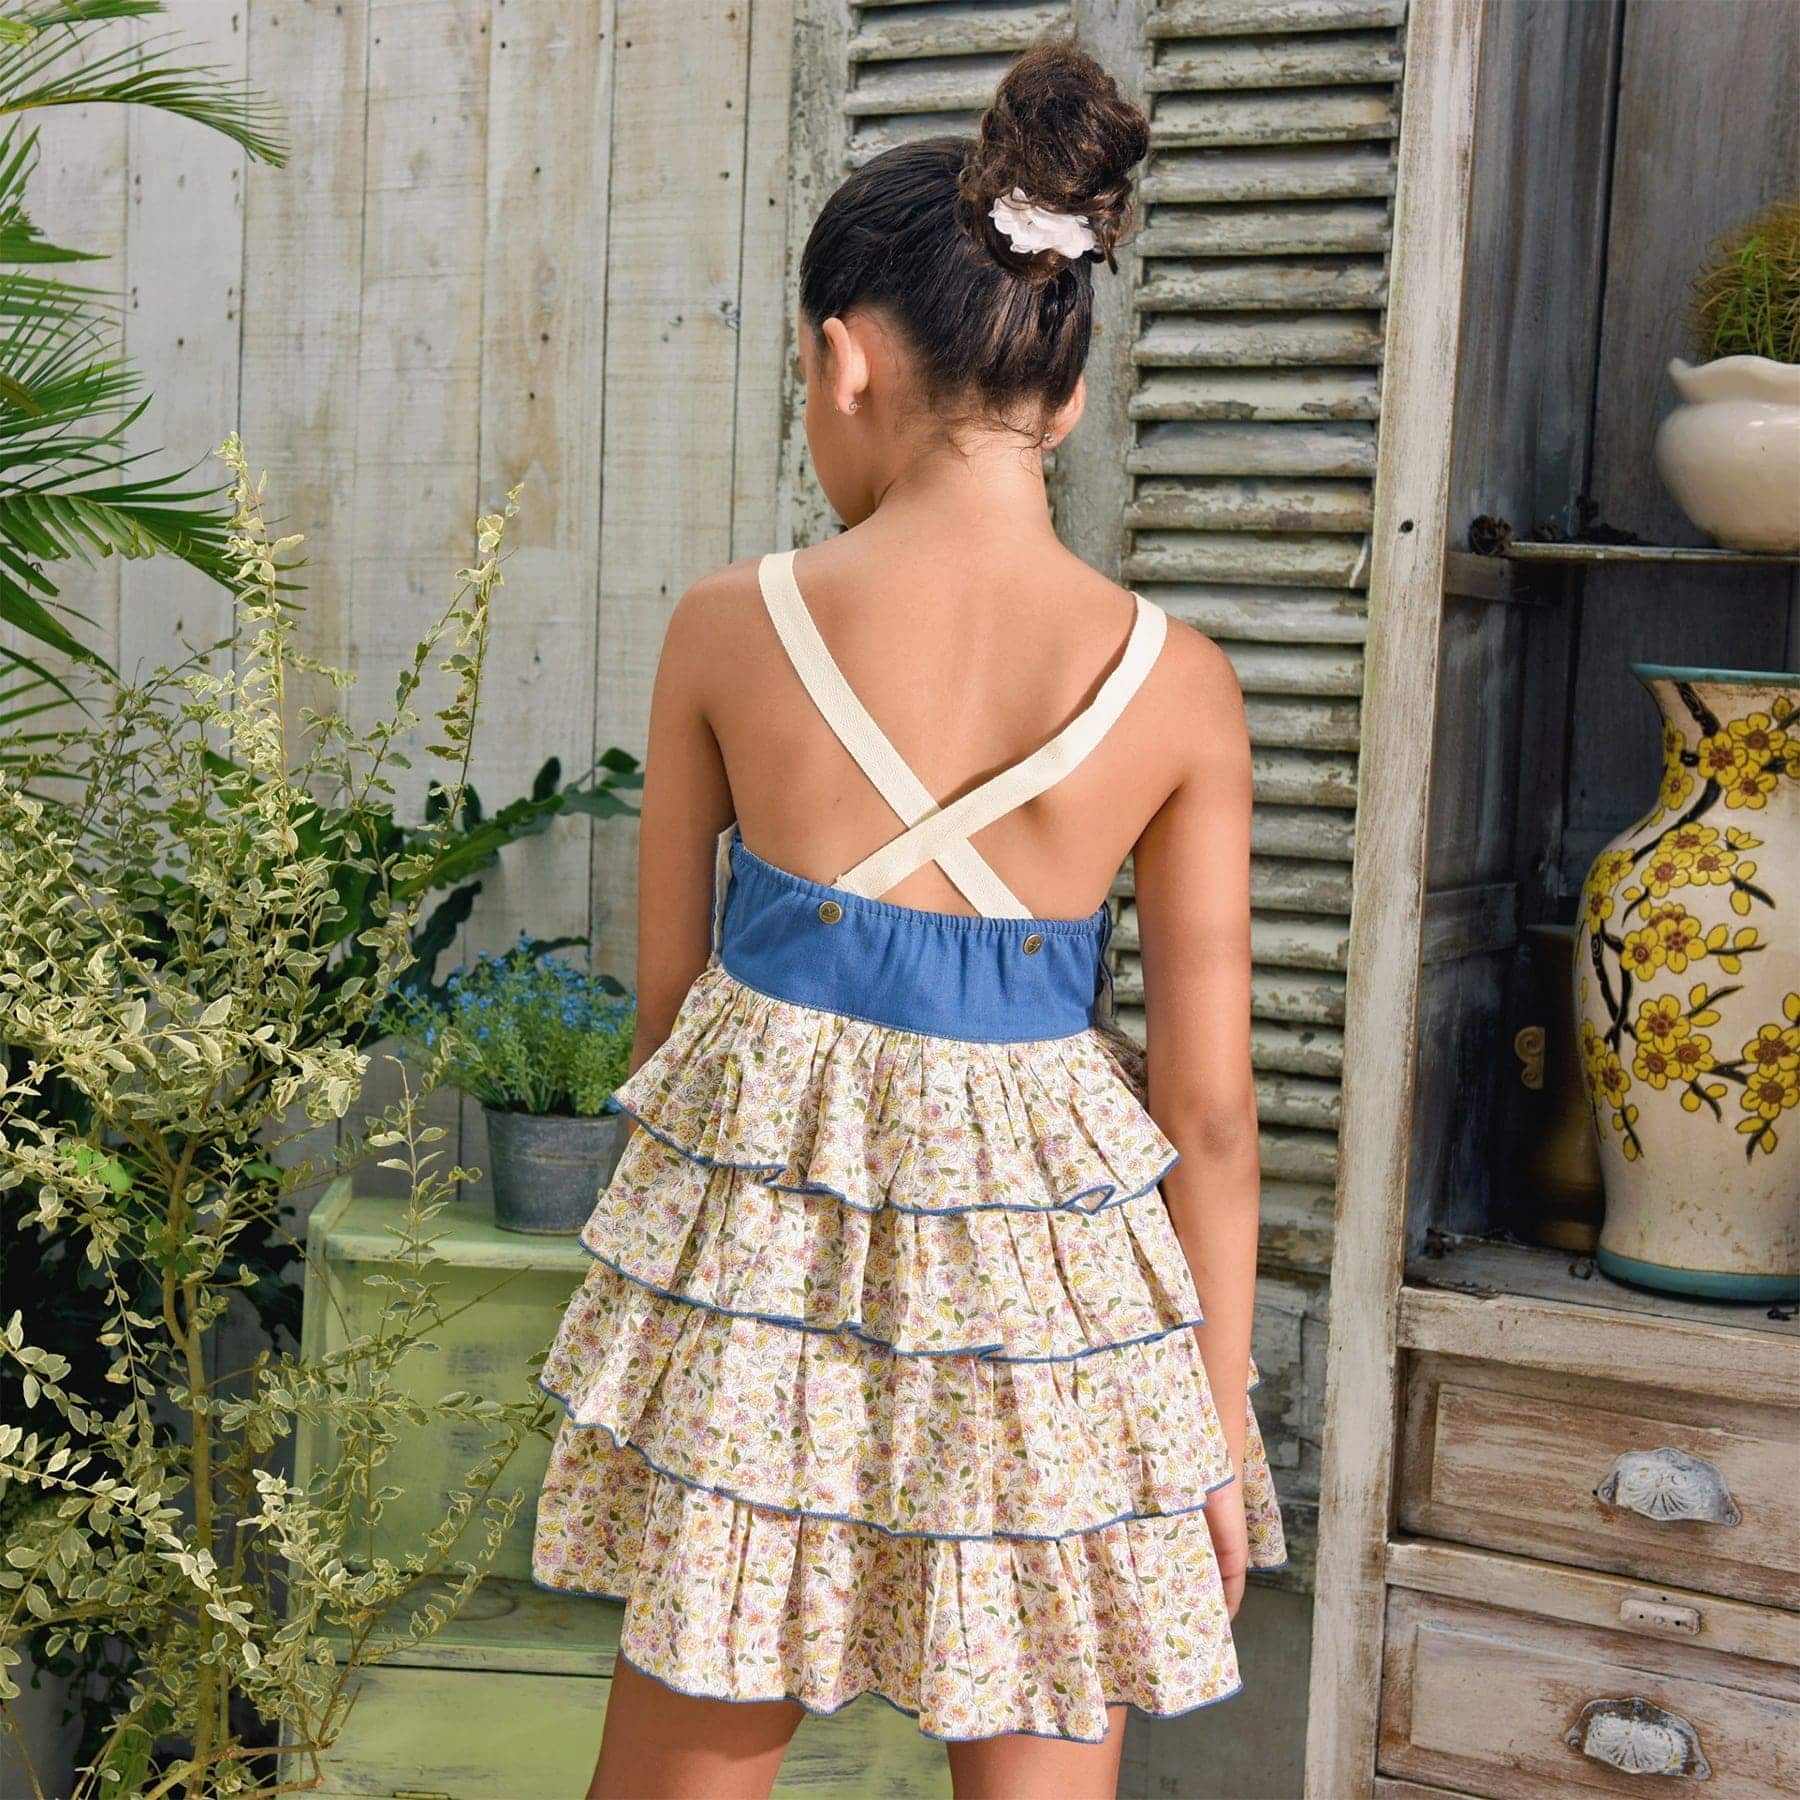 Girl's summer dungaree dress with blue denim cotton top and yellow and light blue floral ruffle bottom, adjustable cross-back straps. Model dungarees dress with ruffles for girls, girls of the brand of children's fashion LA. FAUTE A VOLTAIRE